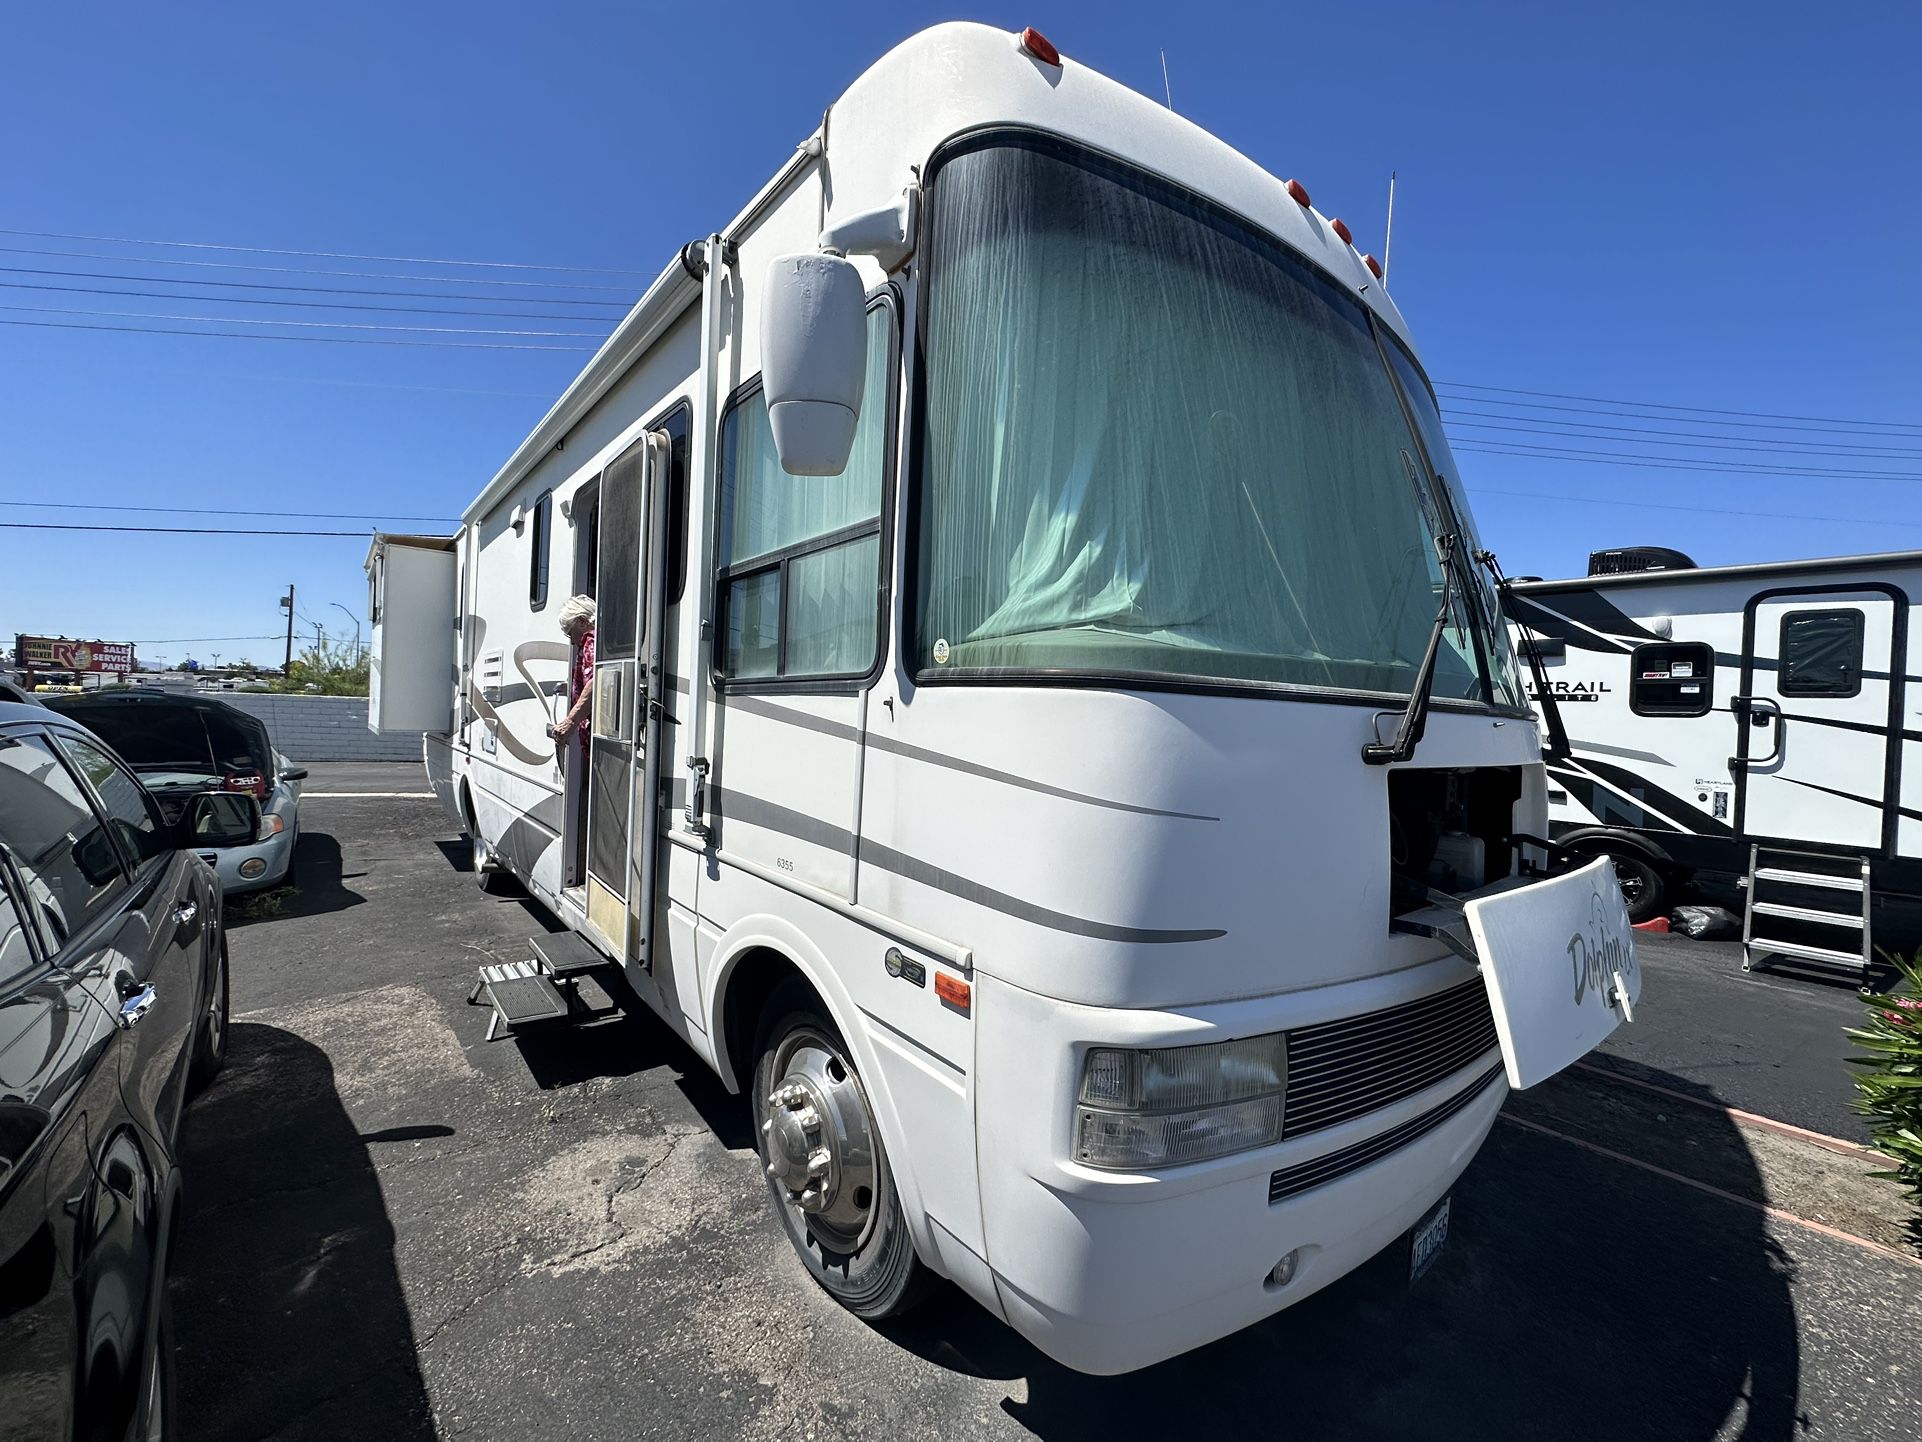 2003 DOLPHIN LX DOUBLE SLIDE 35”ft 